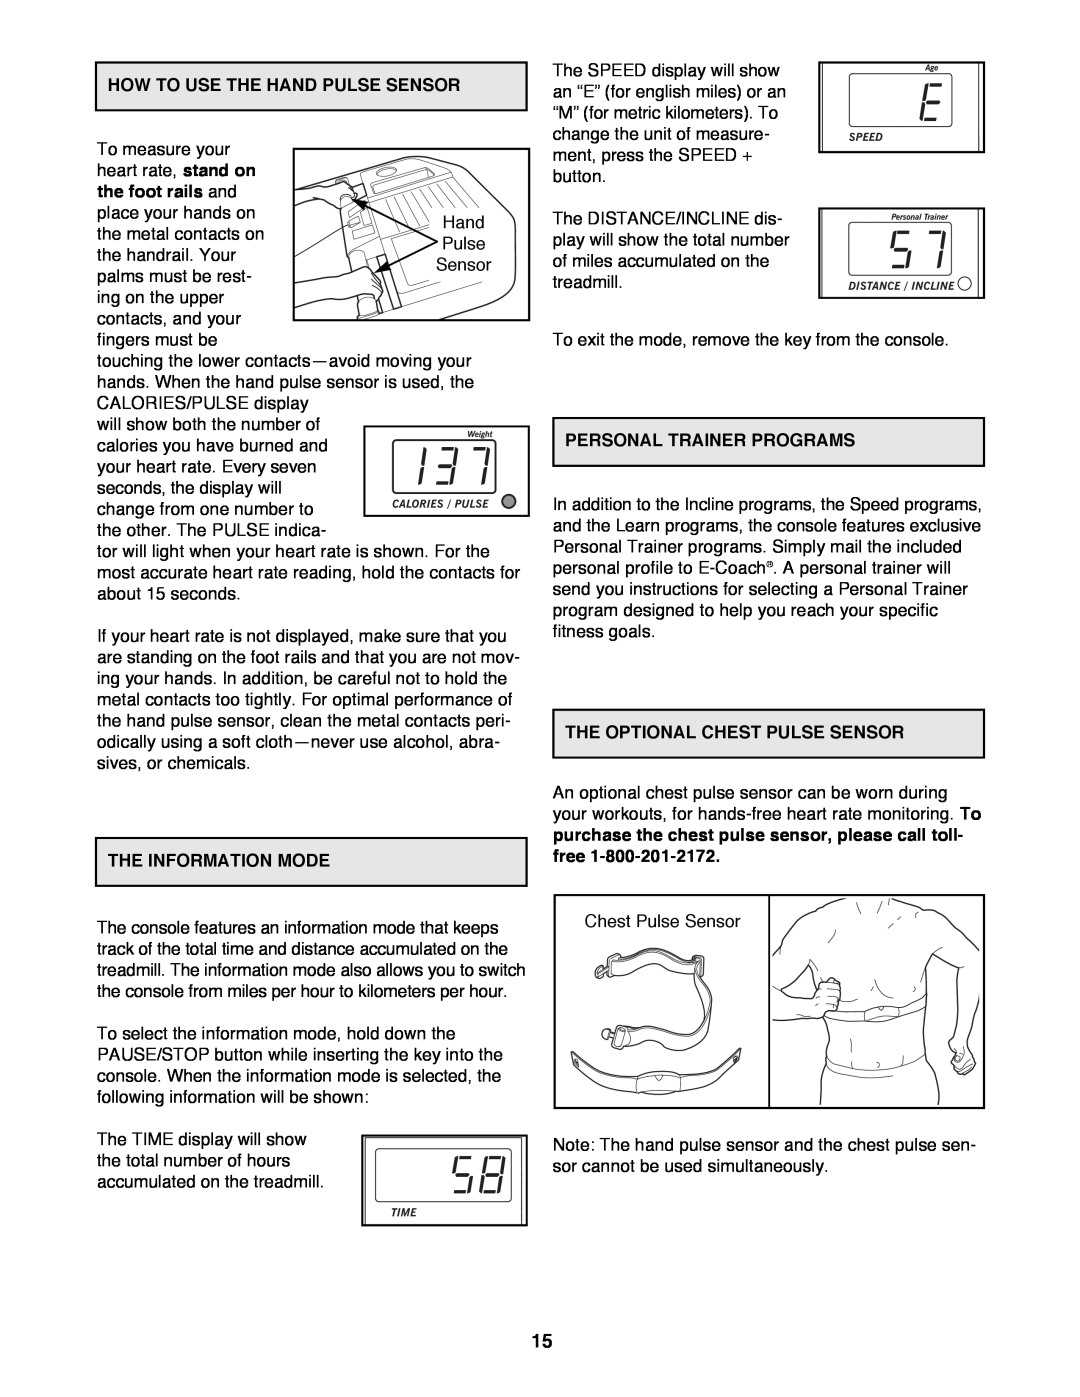 Healthrider HRTL14980 manual How To Use The Hand Pulse Sensor, the foot rails and place your hands on the metal contacts on 